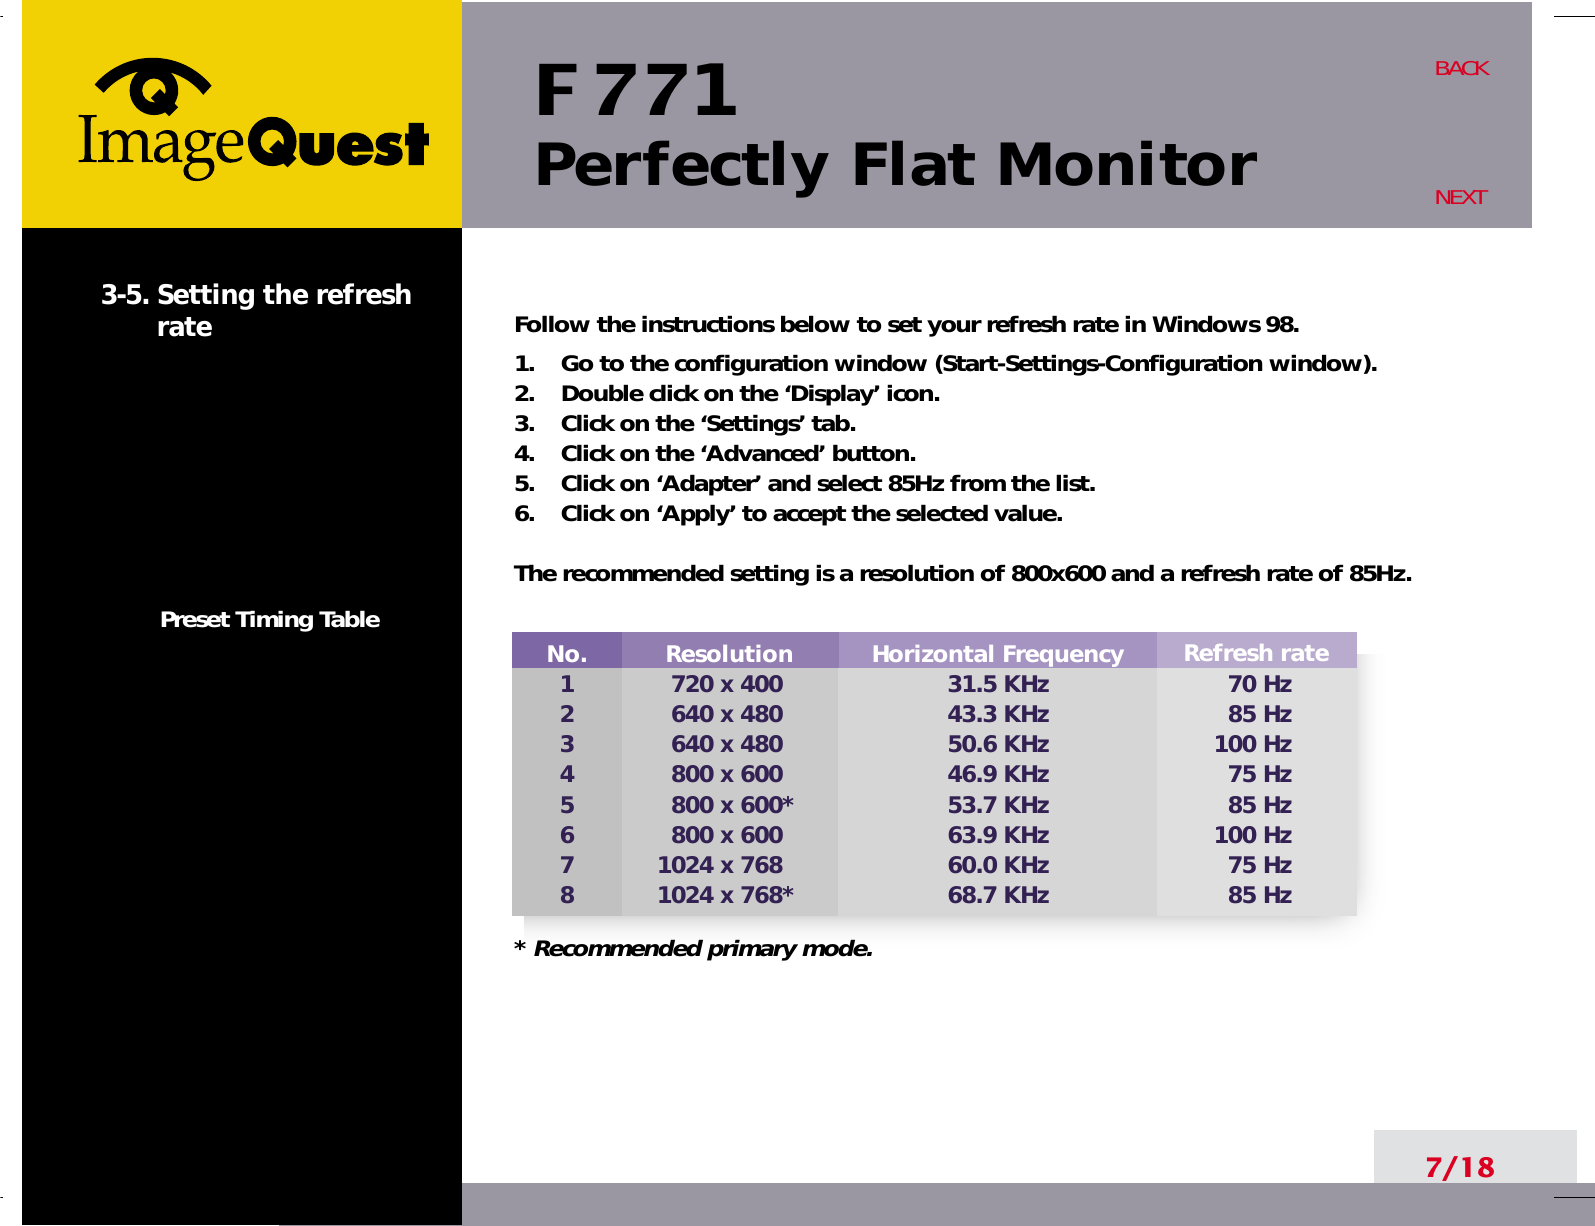 F 771Perfectly Flat Monitor7/18BACKNEXT3-5. Setting the refreshratePreset Timing TableFollow the instructions below to set your refresh rate in Windows 98.1.    Go to the configuration window (Start-Settings-Configuration window).2.    Double click on the ‘Display’ icon.3.    Click on the ‘Settings’ tab.4.    Click on the ‘Advanced’ button.5.    Click on ‘Adapter’ and select 85Hz from the list.6.    Click on ‘Apply’ to accept the selected value.The recommended setting is a resolution of 800x600 and a refresh rate of 85Hz.No.12345678Resolution720 x 400640 x 480640 x 480800 x 600800 x 600*800 x 6001024 x 7681024 x 768*Refresh rate70 Hz85 Hz100 Hz75 Hz85 Hz100 Hz75 Hz85 HzHorizontal Frequency31.5 KHz43.3 KHz50.6 KHz46.9 KHz53.7 KHz63.9 KHz60.0 KHz68.7 KHz* Recommended primary mode.